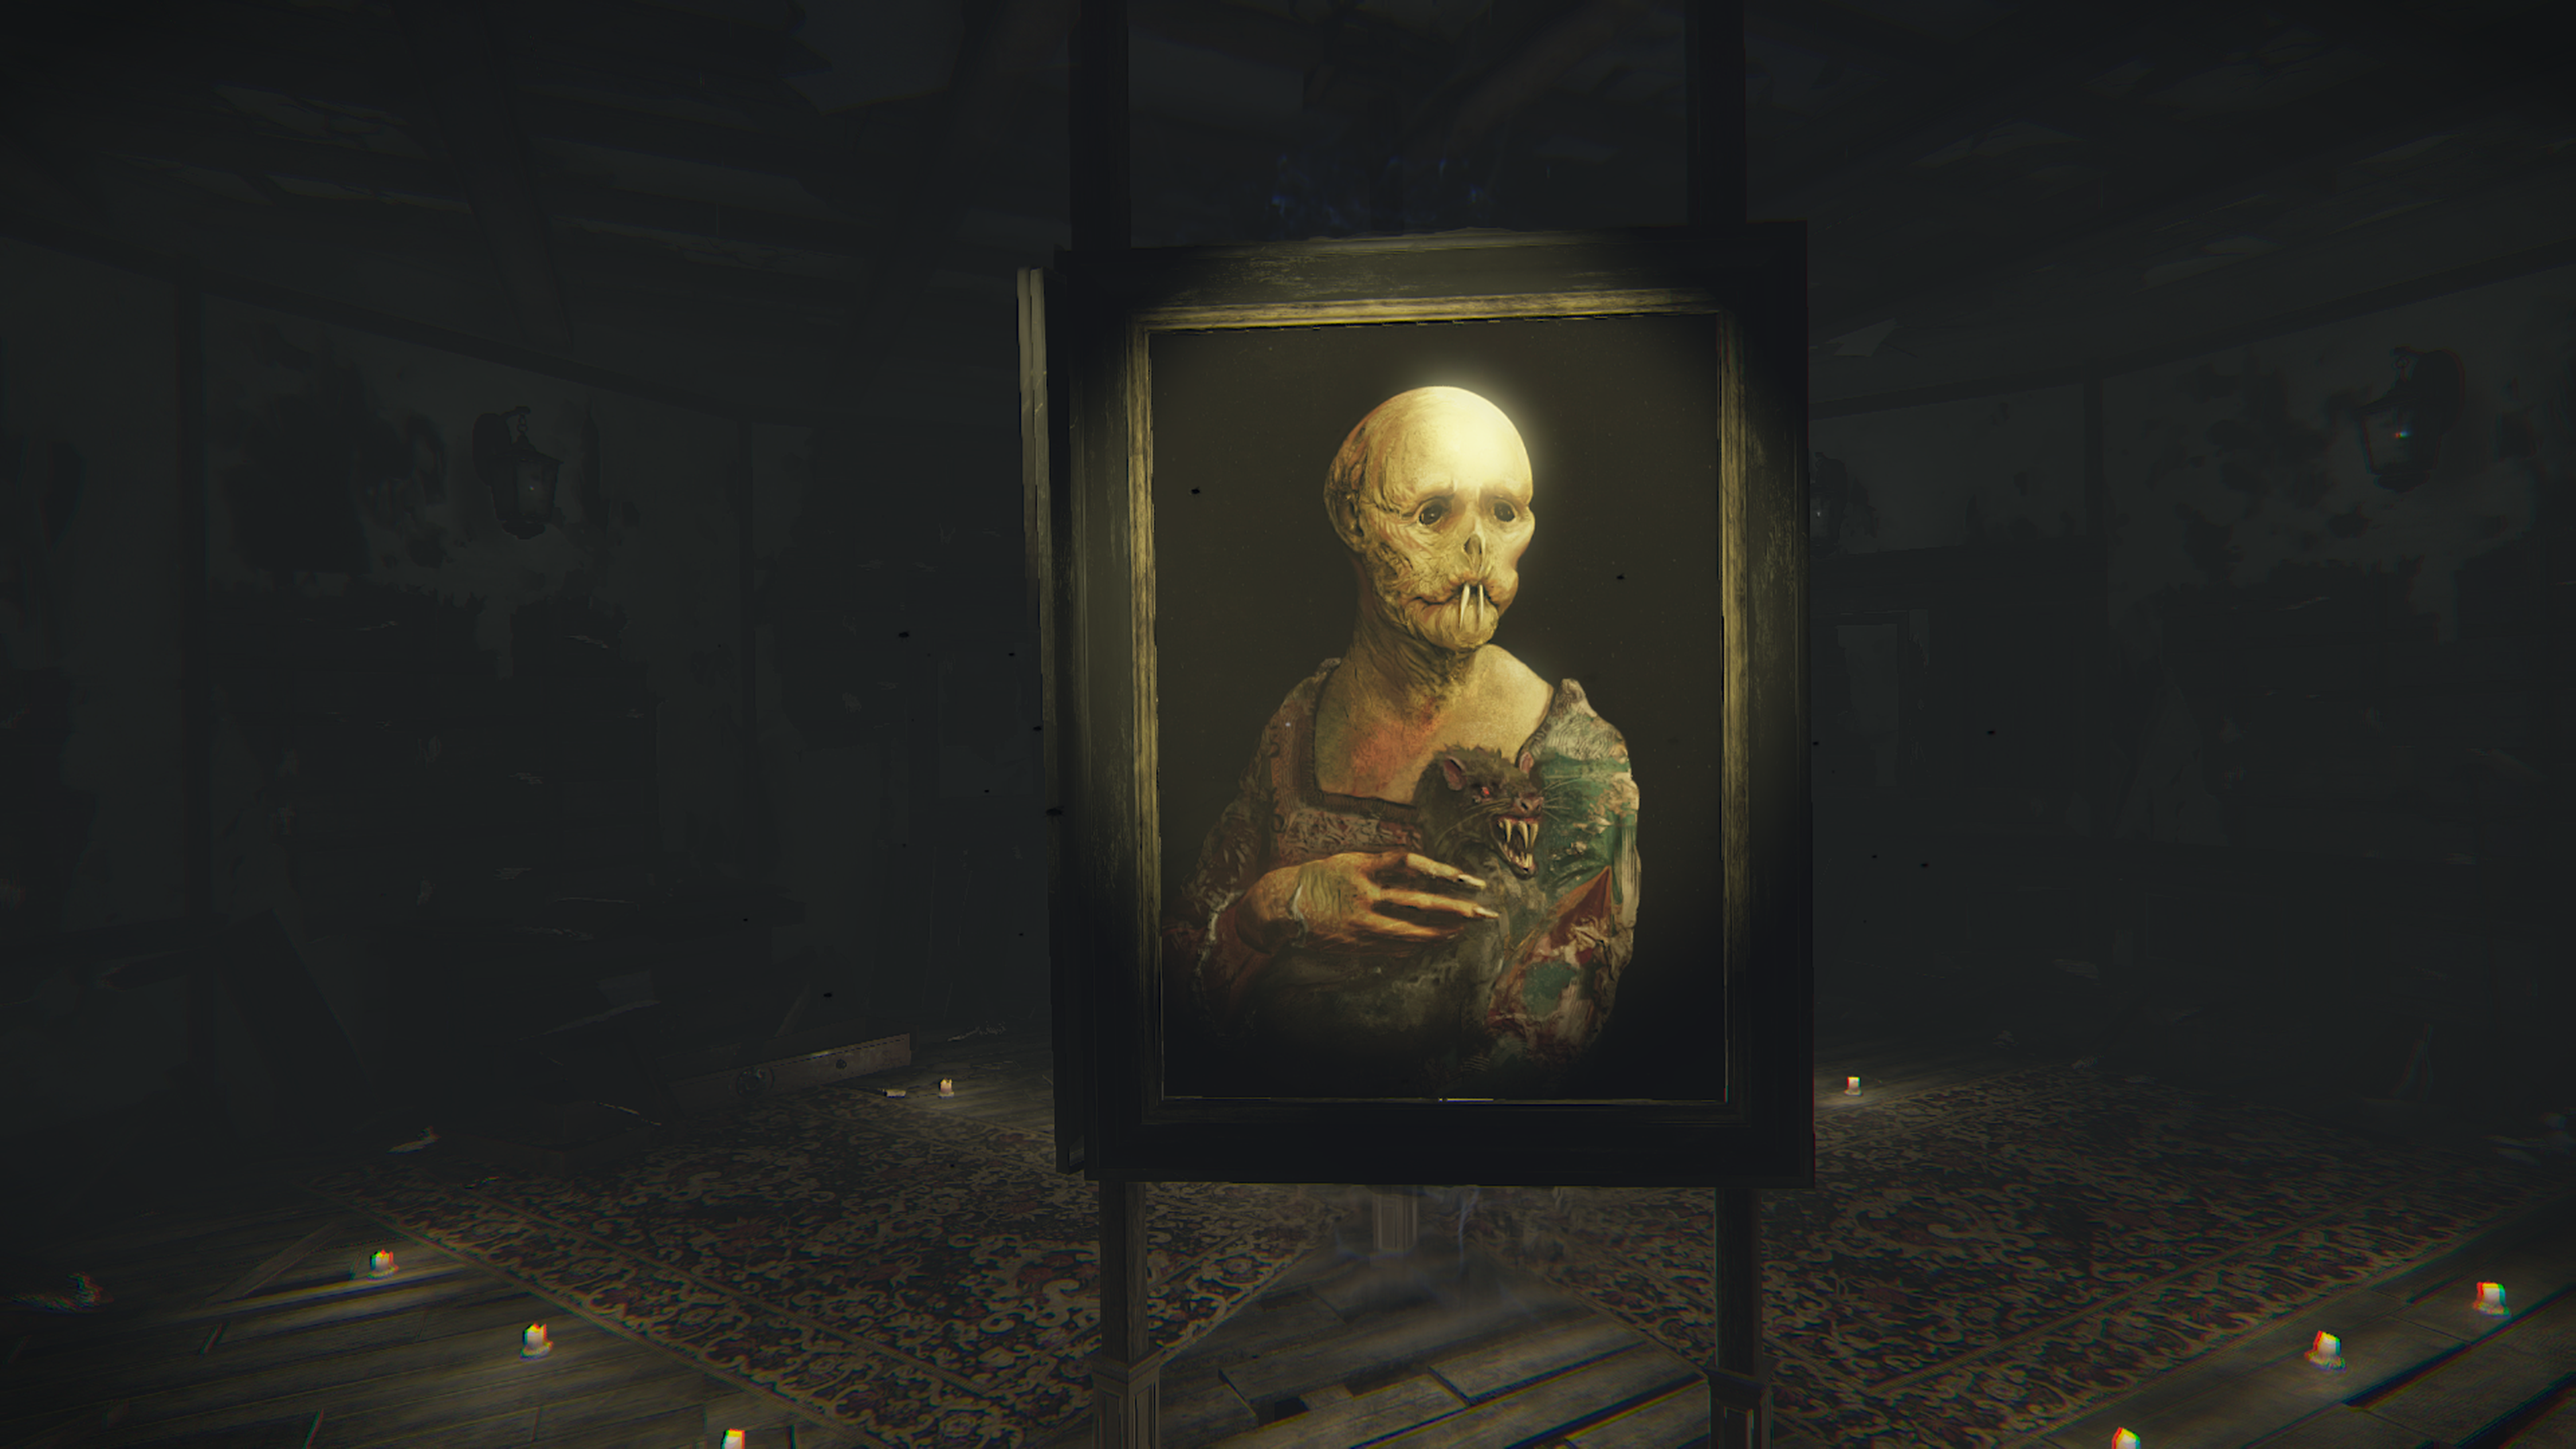 Layers of Fear launches June 15 - Gematsu